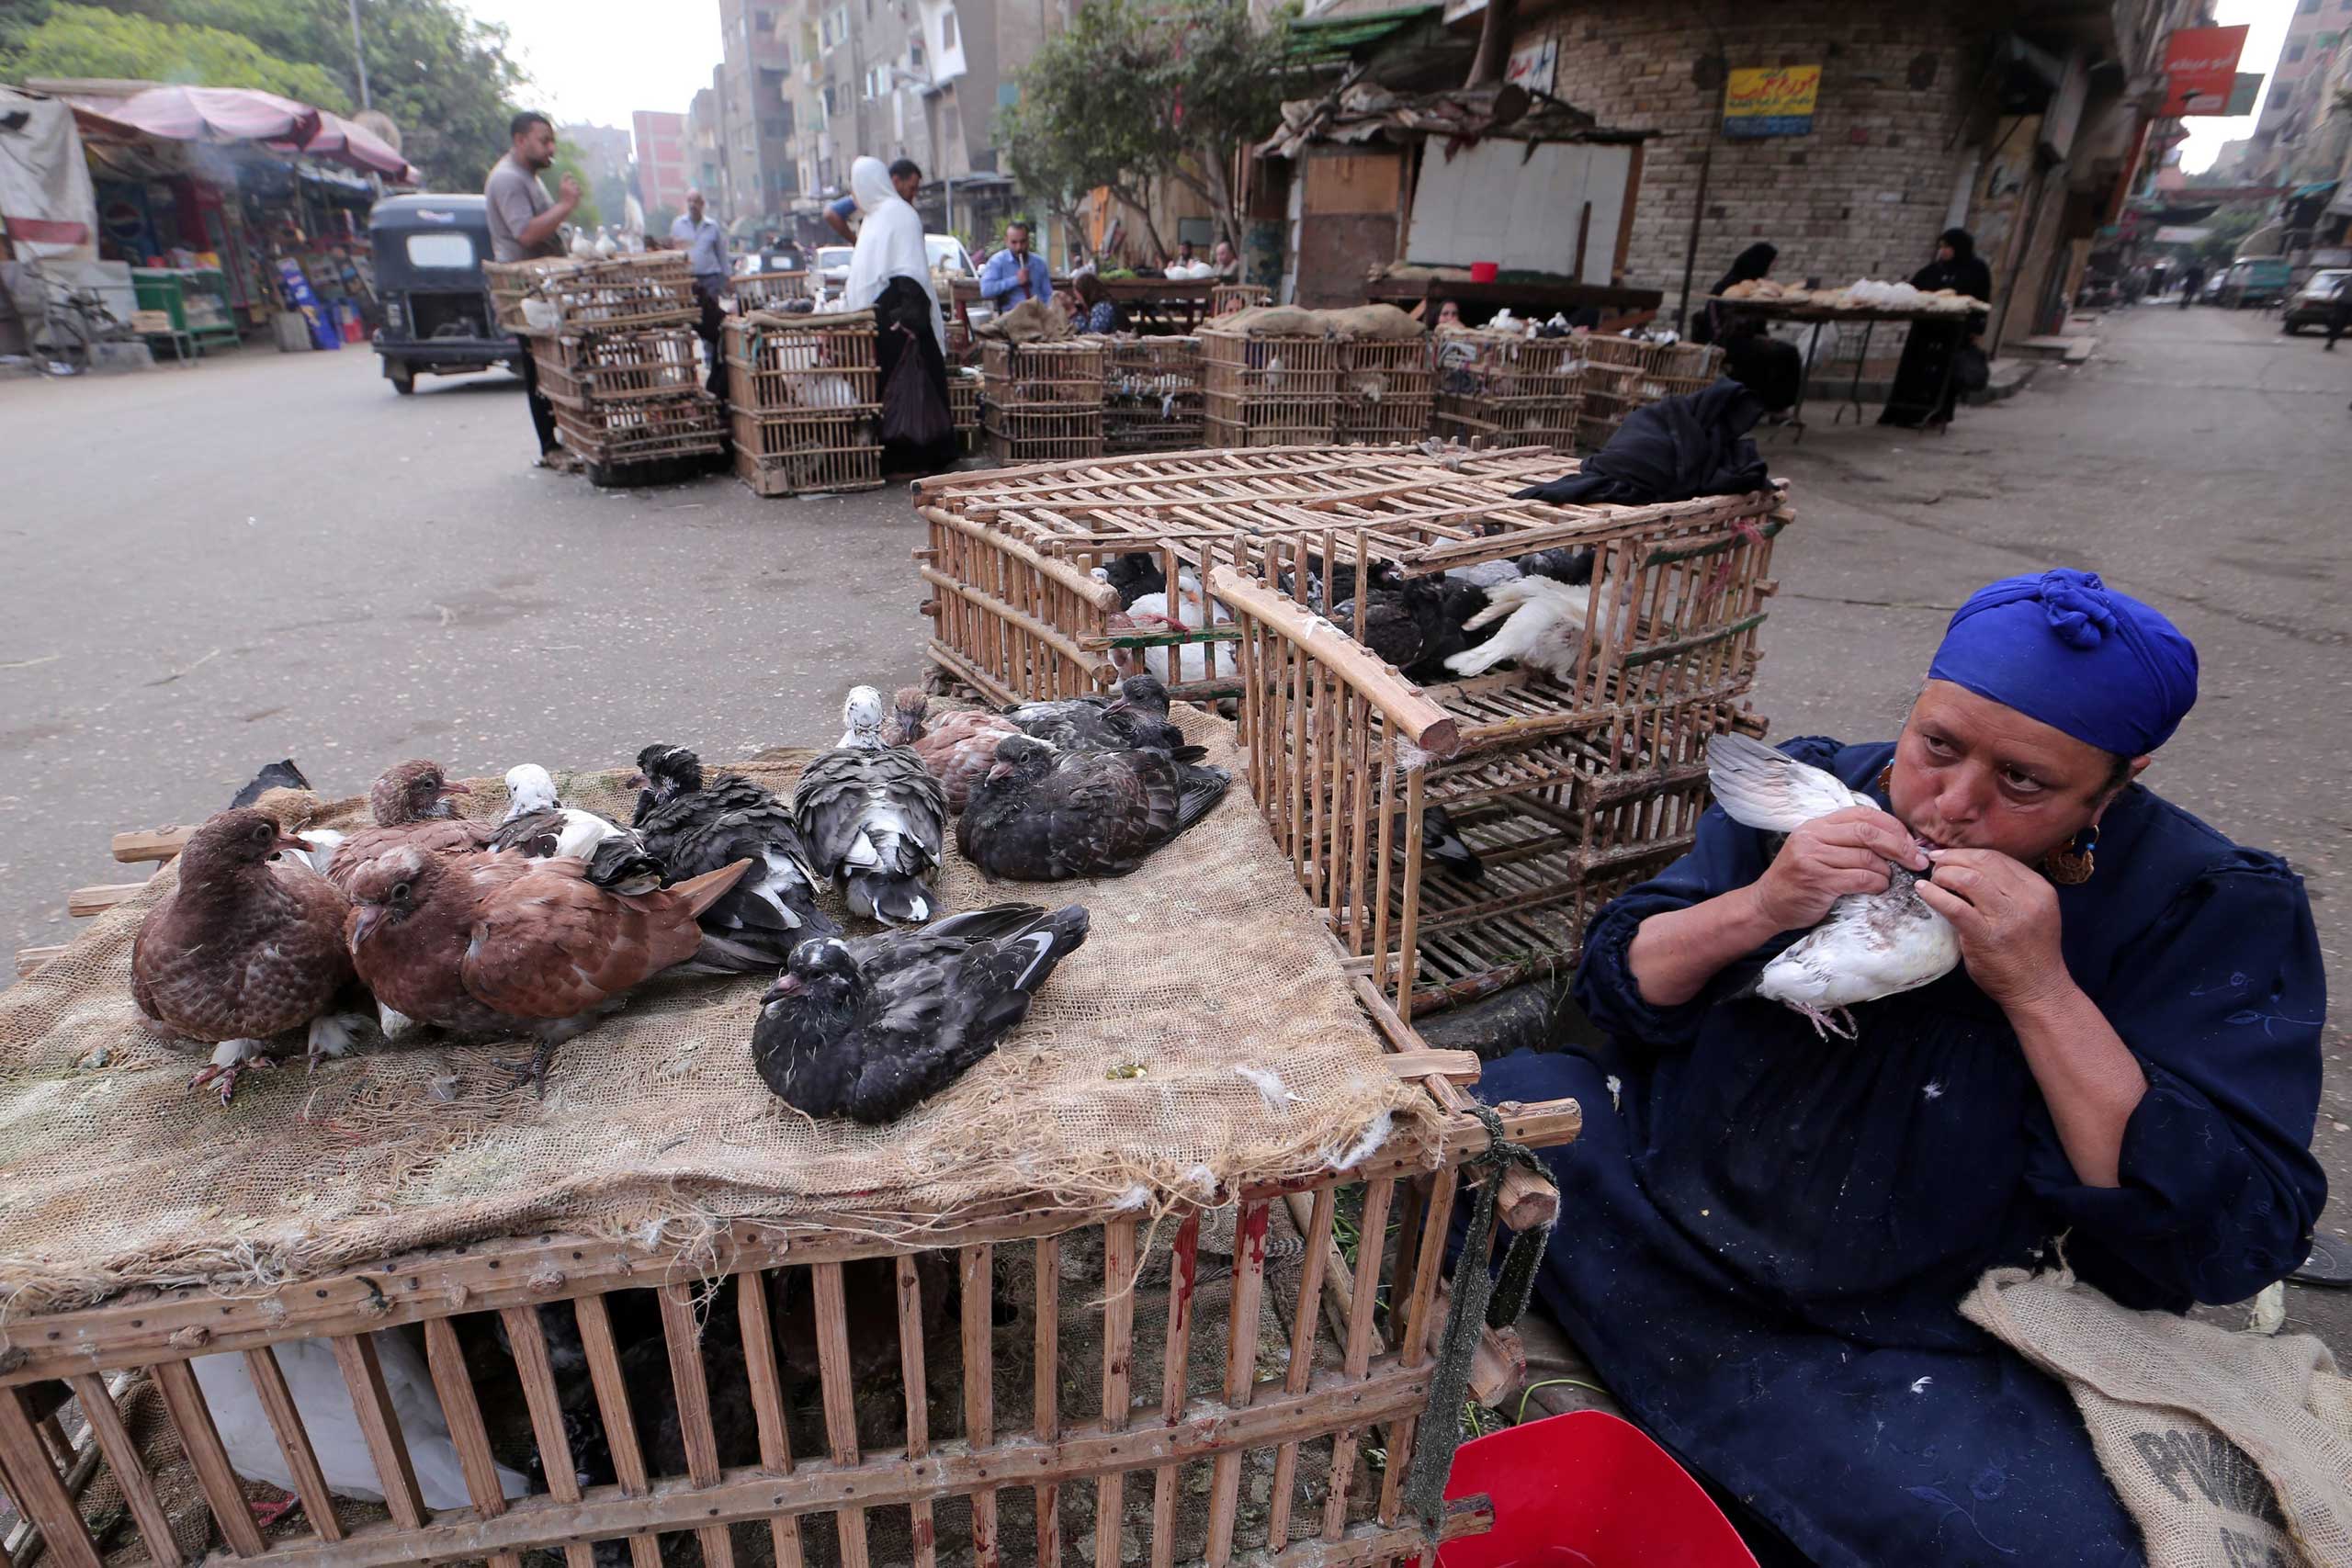 A poultry merchant feeds a pigeon from her mouth in a popular market in Cairo, Egypt, Nov. 19 2014. (Khaled Elfiqi—EPA)